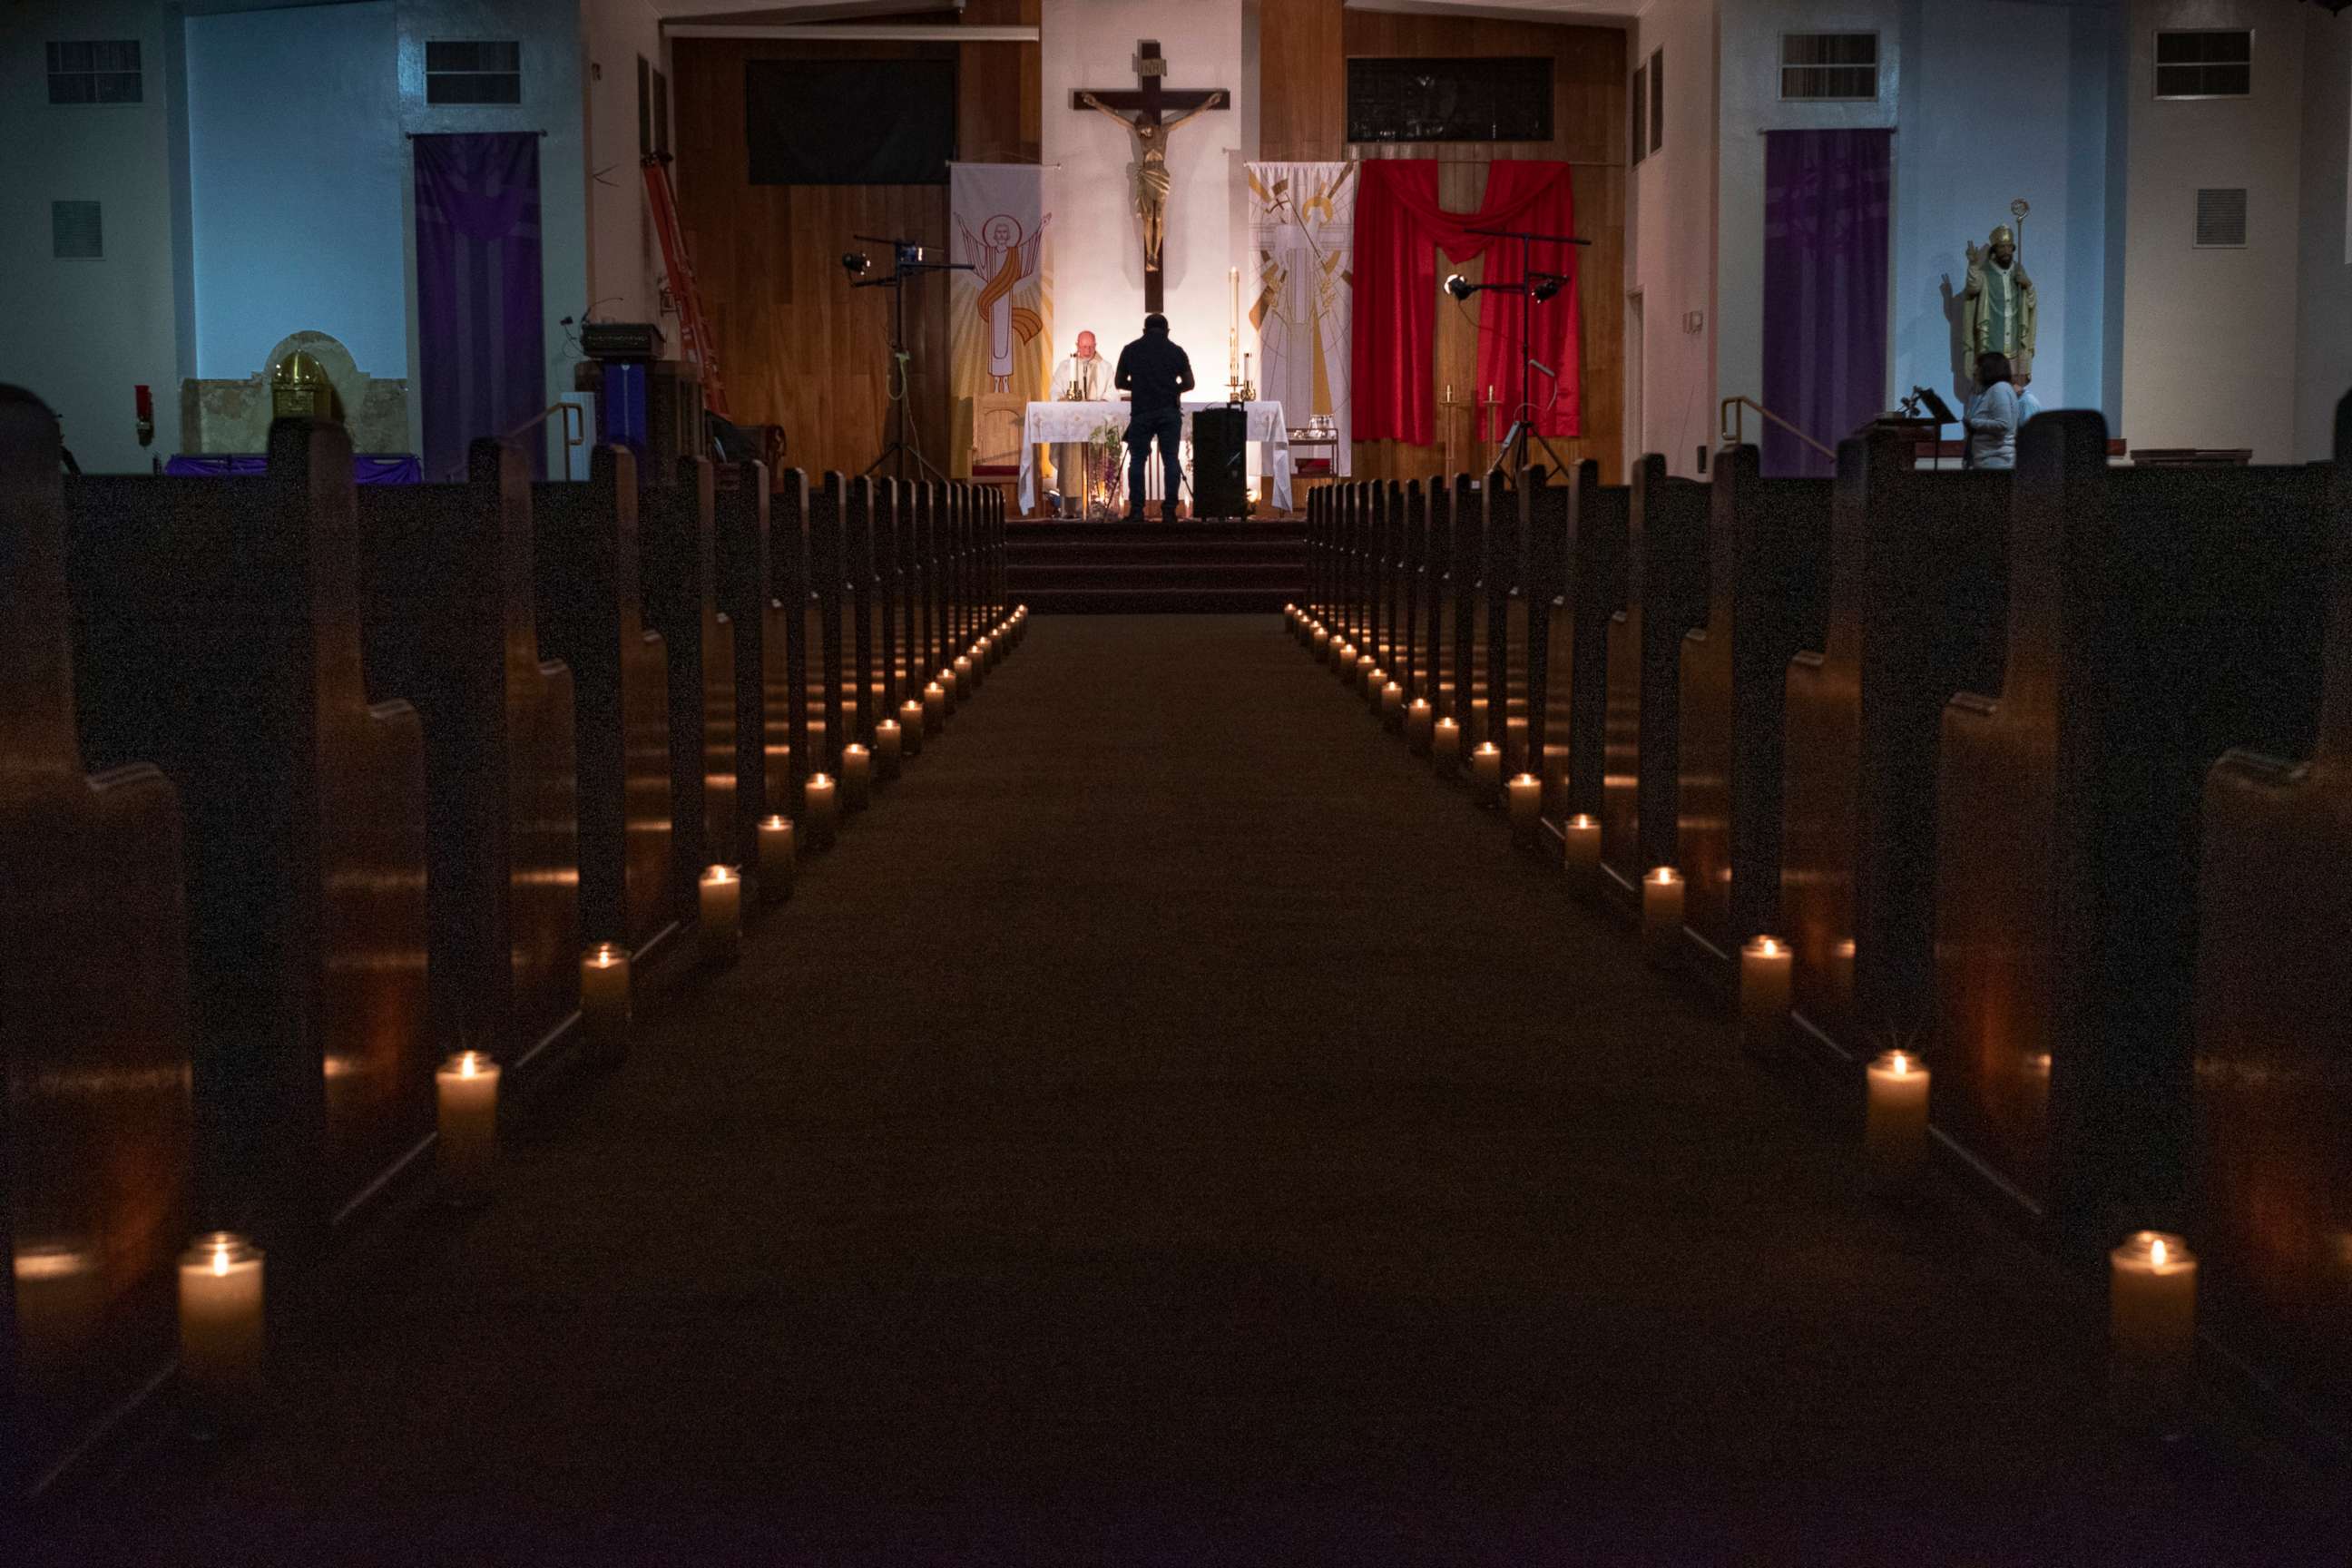 PHOTO: Pastor Nicolas Sanchez celebrates Easter Vigil Mass at his church decorated with candles and pictures sent by his parishioners attached to their pews at St. Patrick Church in North Hollywood, Calif., April 11, 2020.